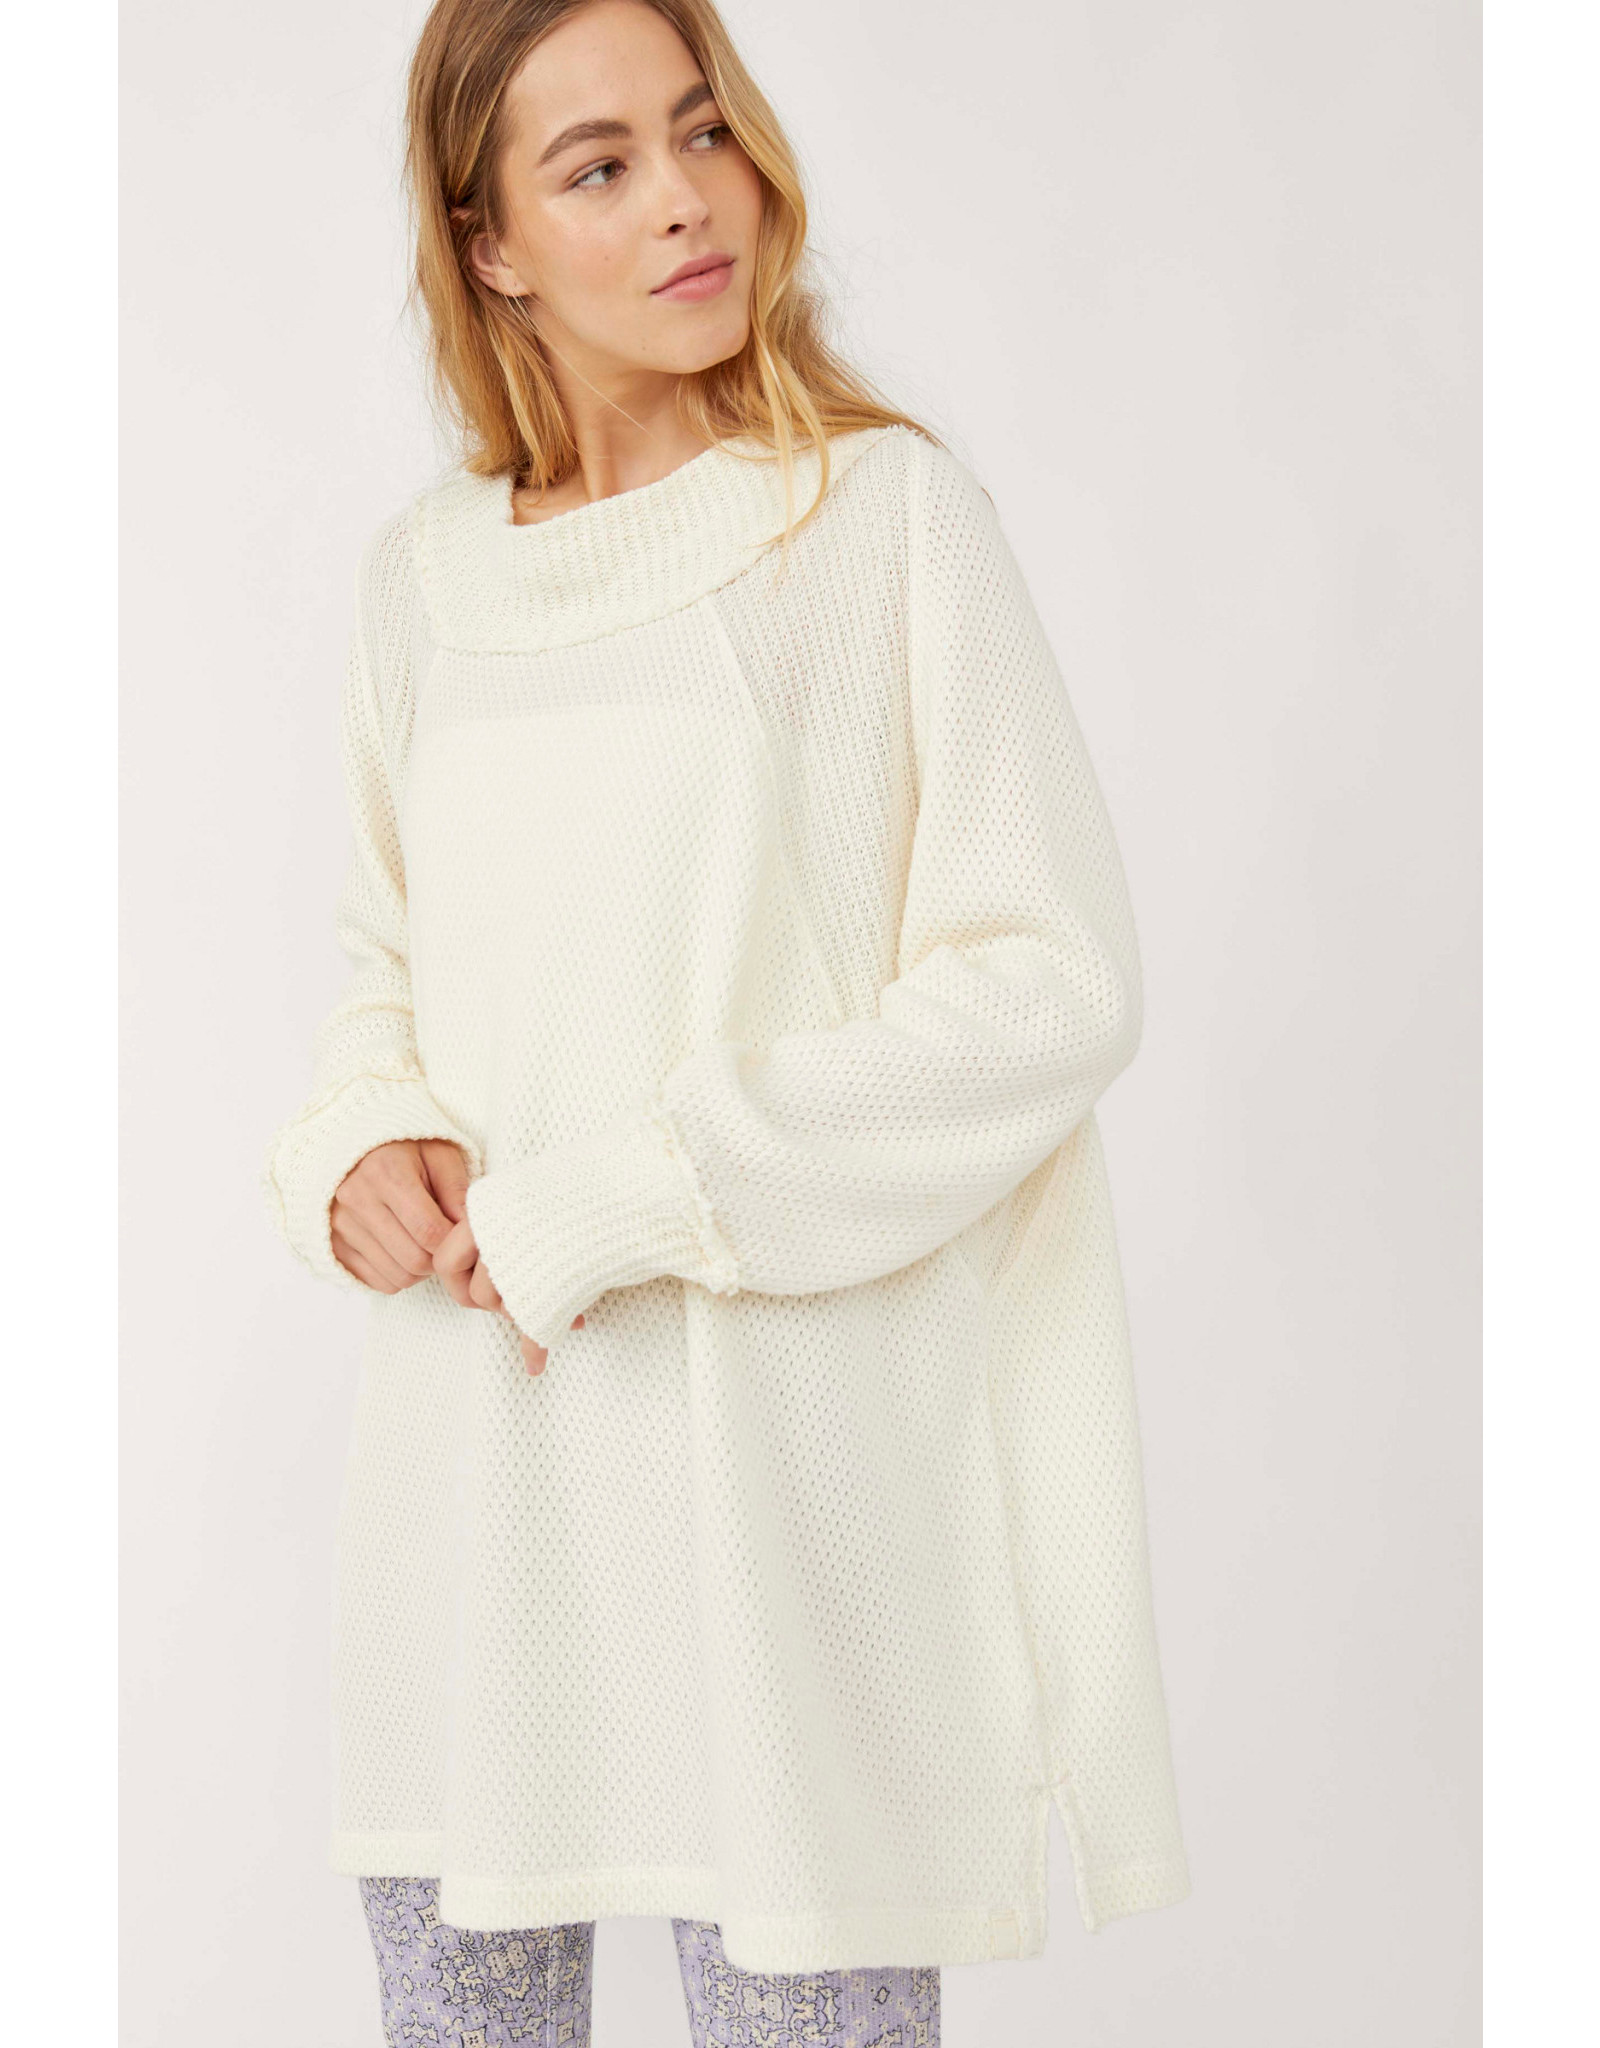 Free people Free People - She's a Keeper vented hem sweater (French vanilla)